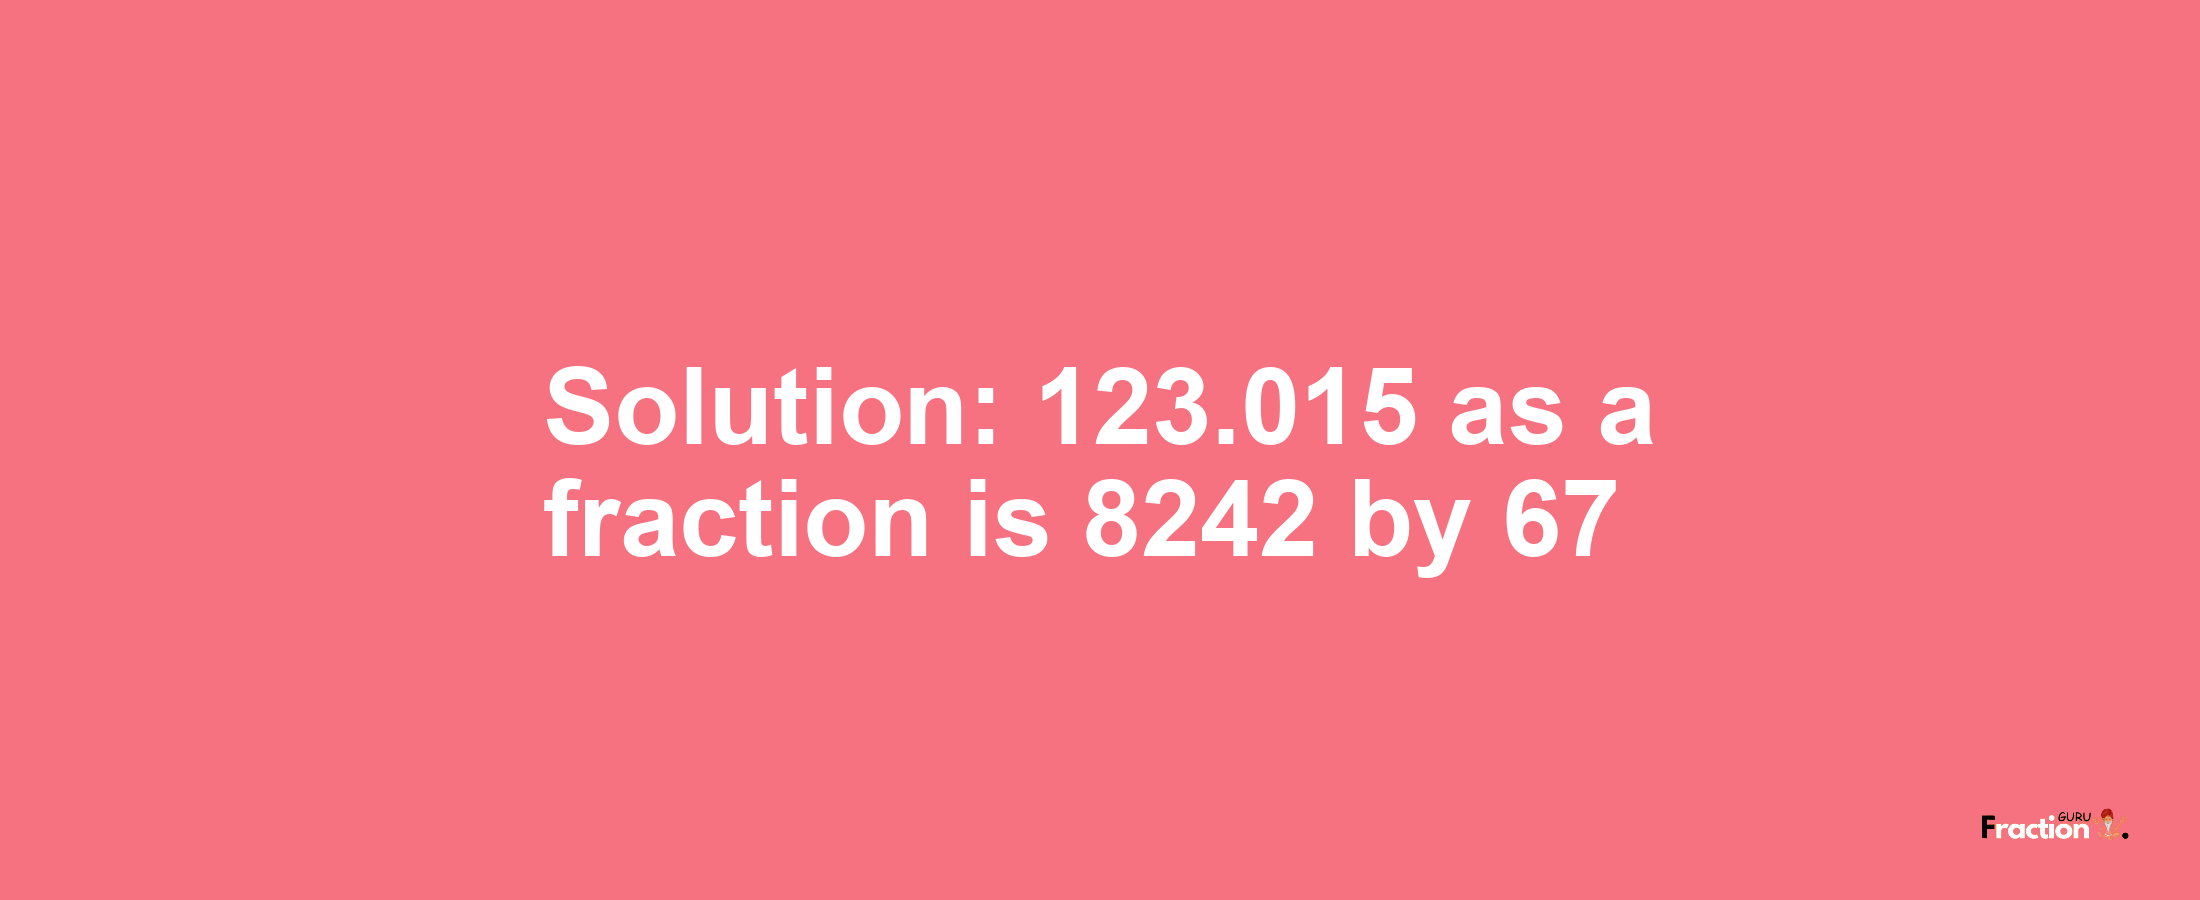 Solution:123.015 as a fraction is 8242/67